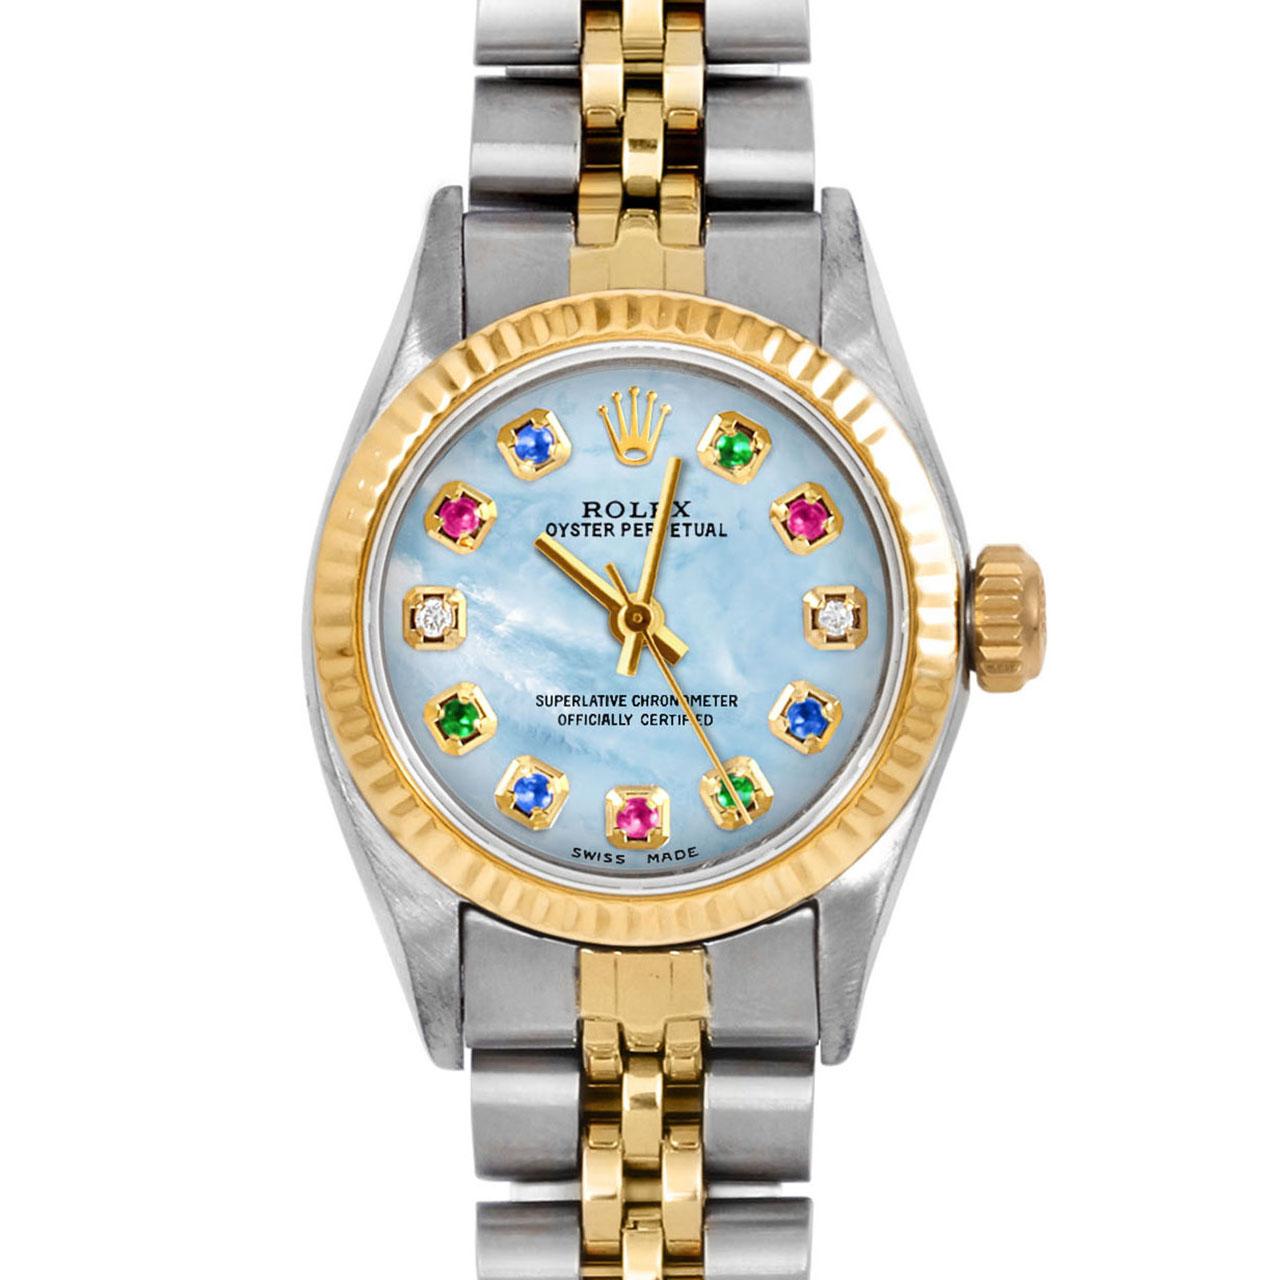 Brand : Rolex
Model : Oyster Perpetual 
Gender : Ladies
Metals : 14K Yellow Gold / Stainless Steel
Case Size : 24 mm
Dial : Custom Blue Mother Of Pearl Rainbow Emerald Ruby Sapphire Diamond Dial (This dial is not original Rolex And has been added